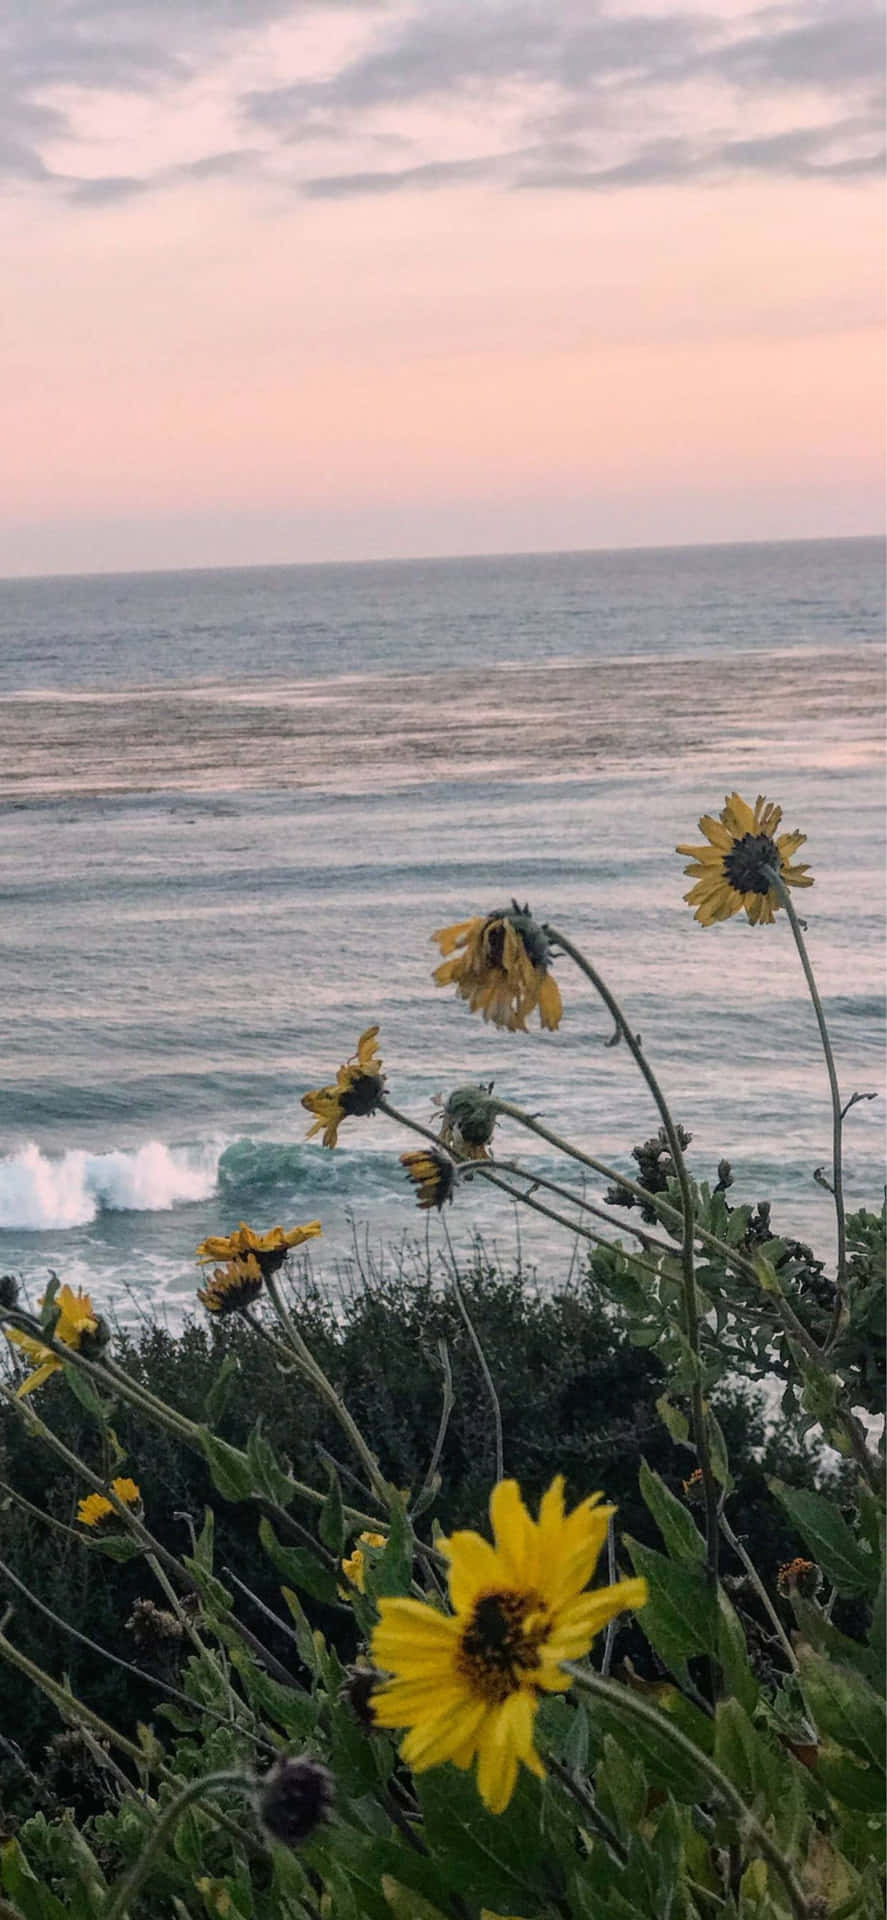 Iphone Xs Max Malibu Background Flowers By The Beach